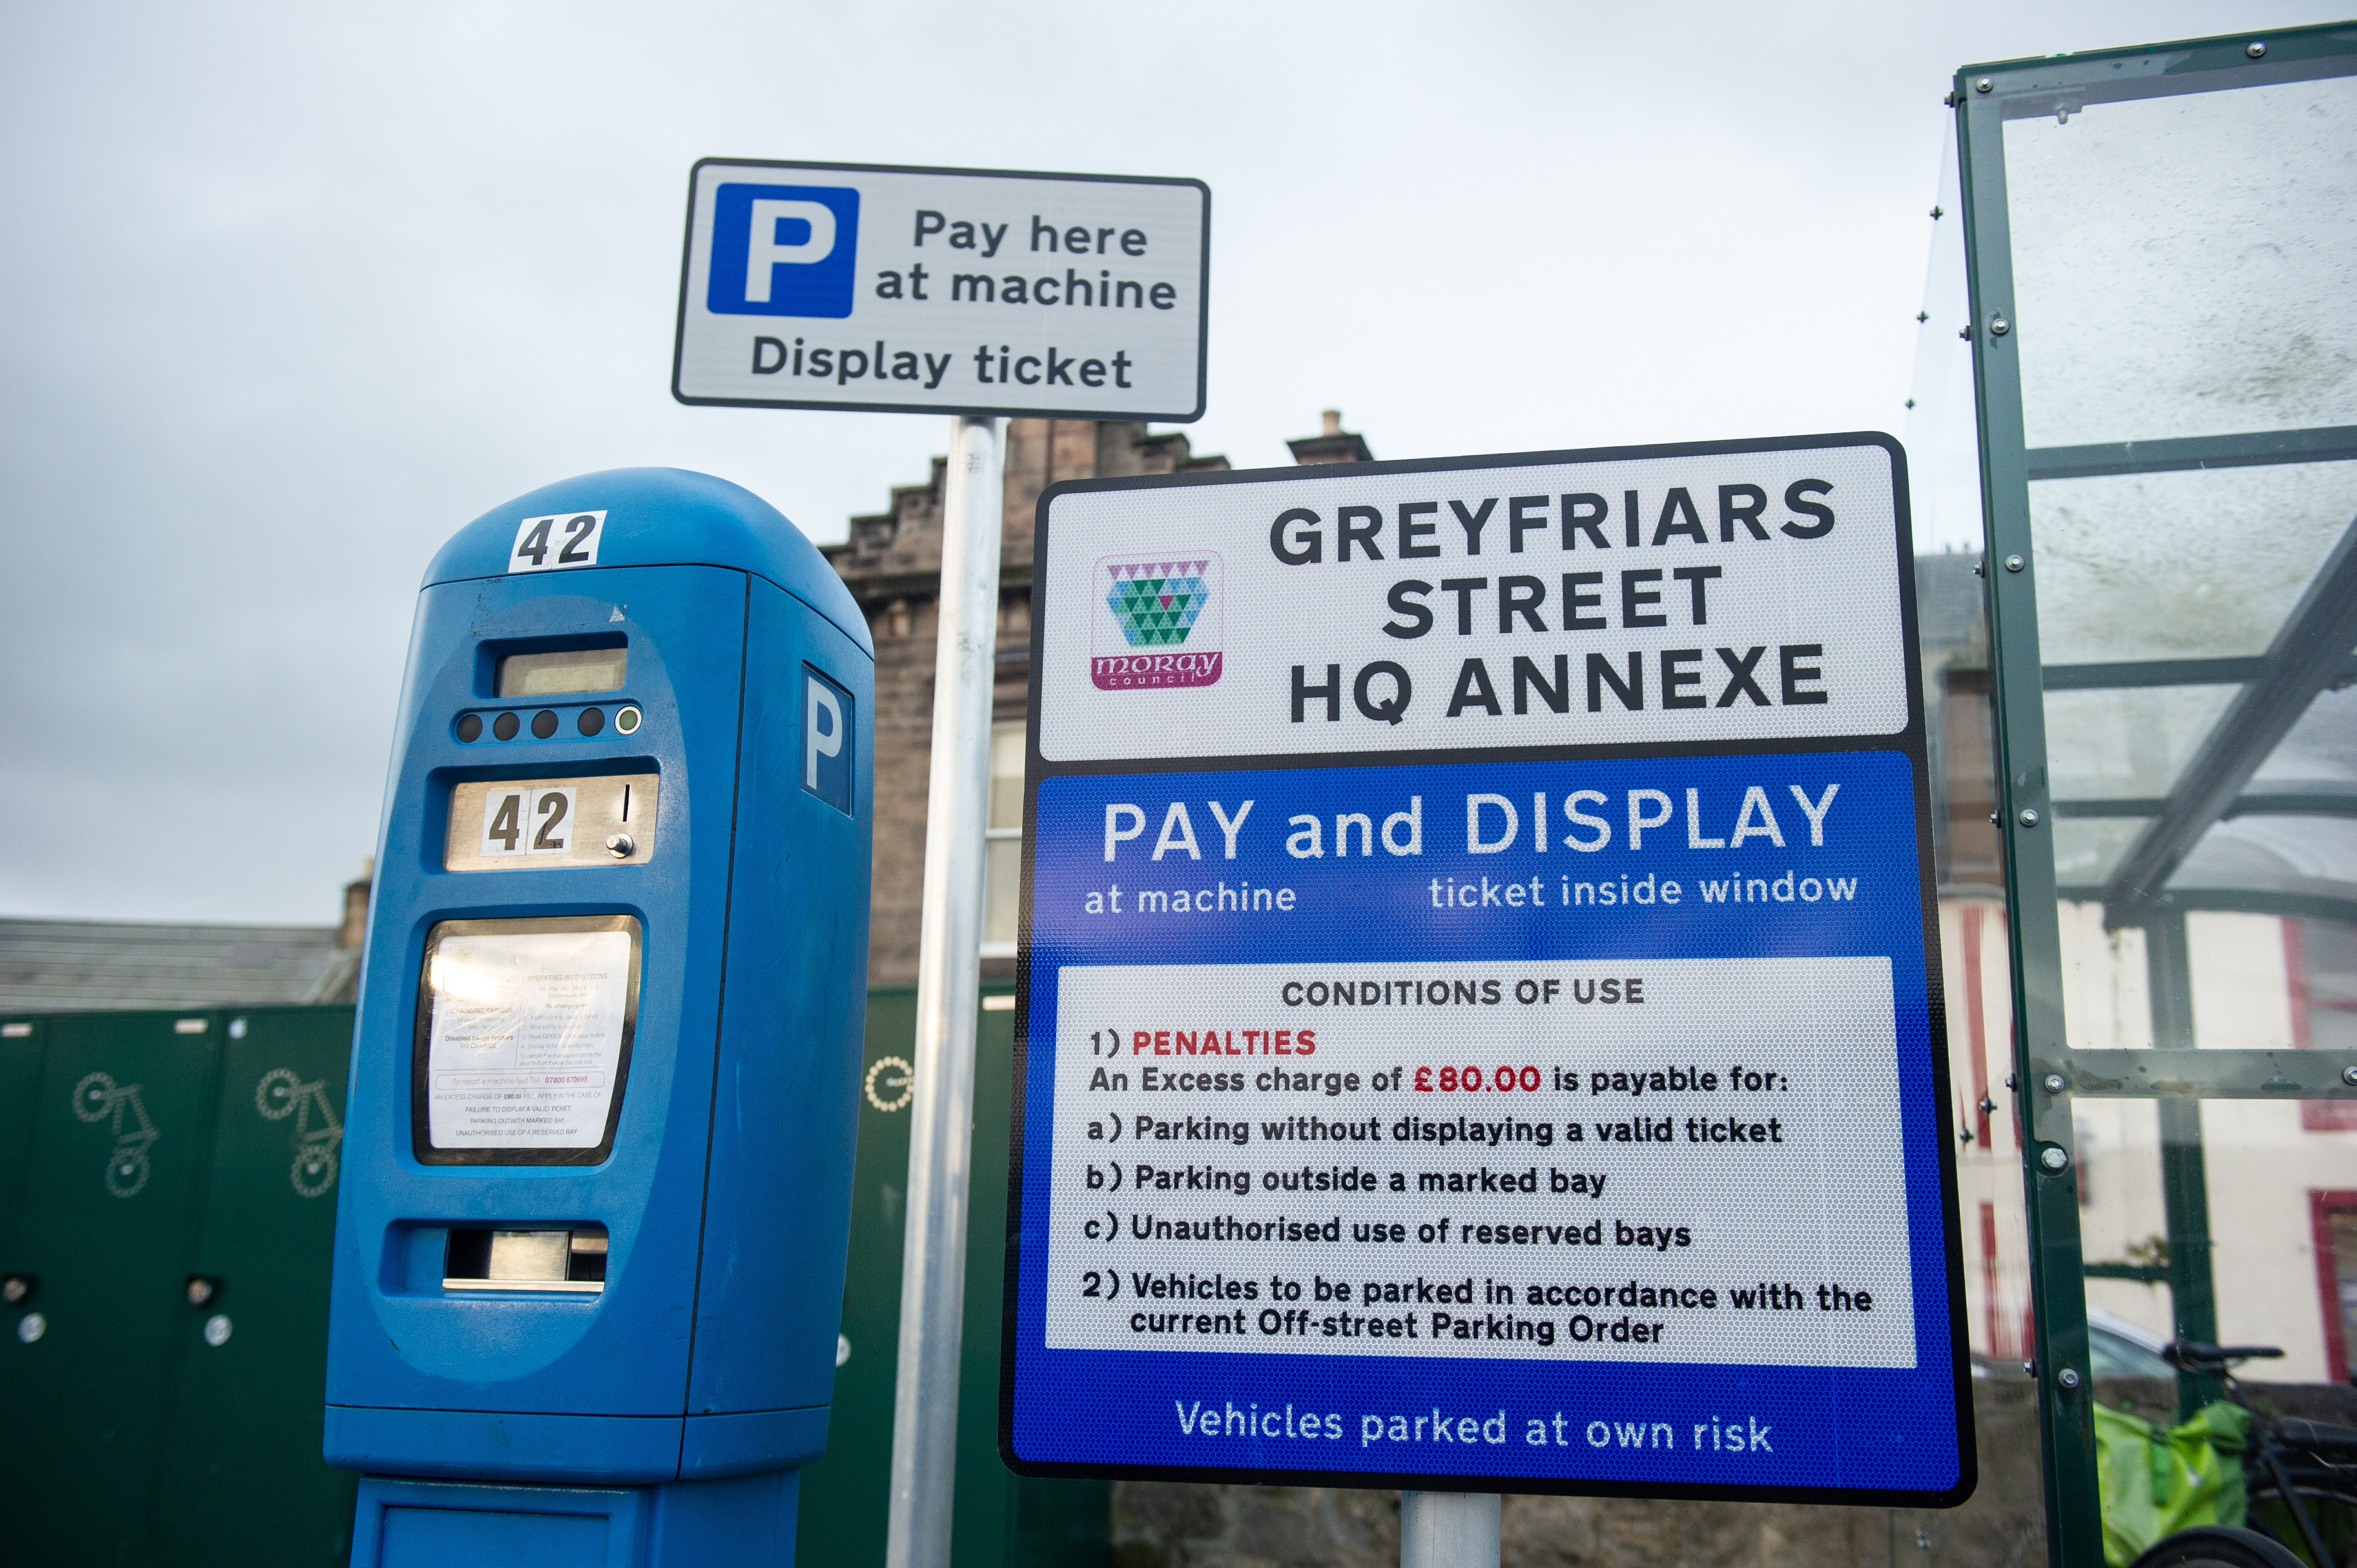 Greyfriars St. HQ Annex car park in Elgin, Moray.

Picture by JASON HEDGES